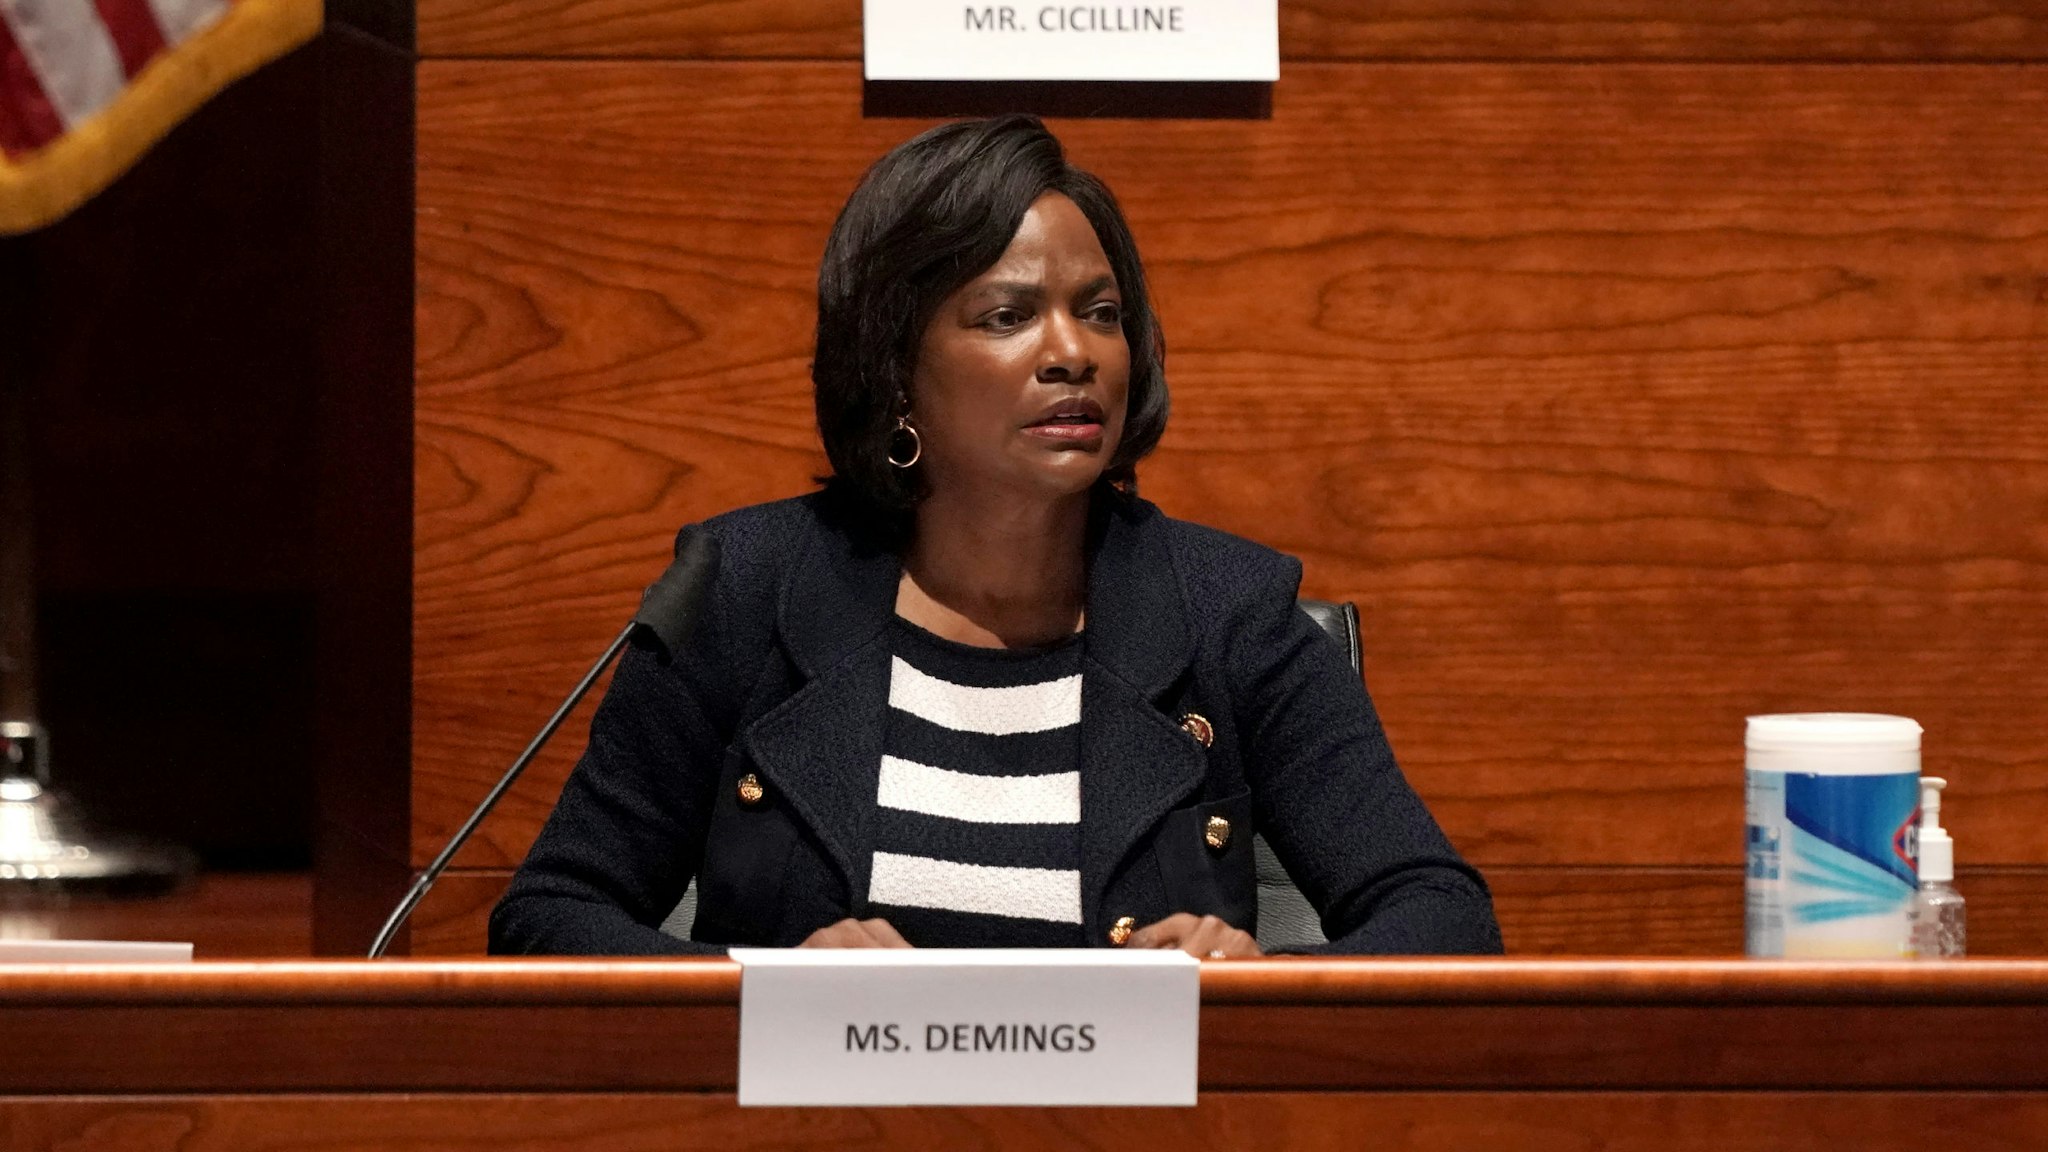 WASHINGTON, DC - JUNE 10: U.S. Rep. Val Demings (D-FL) questions witnesses at a House Judiciary Committee hearing on police brutality and racial profiling on June 10, 2020 in Washington, DC. George Floyd died May 25 while in Minneapolis police custody, sparking worldwide protests. (Photo by Greg Nash-Pool/Getty Images)